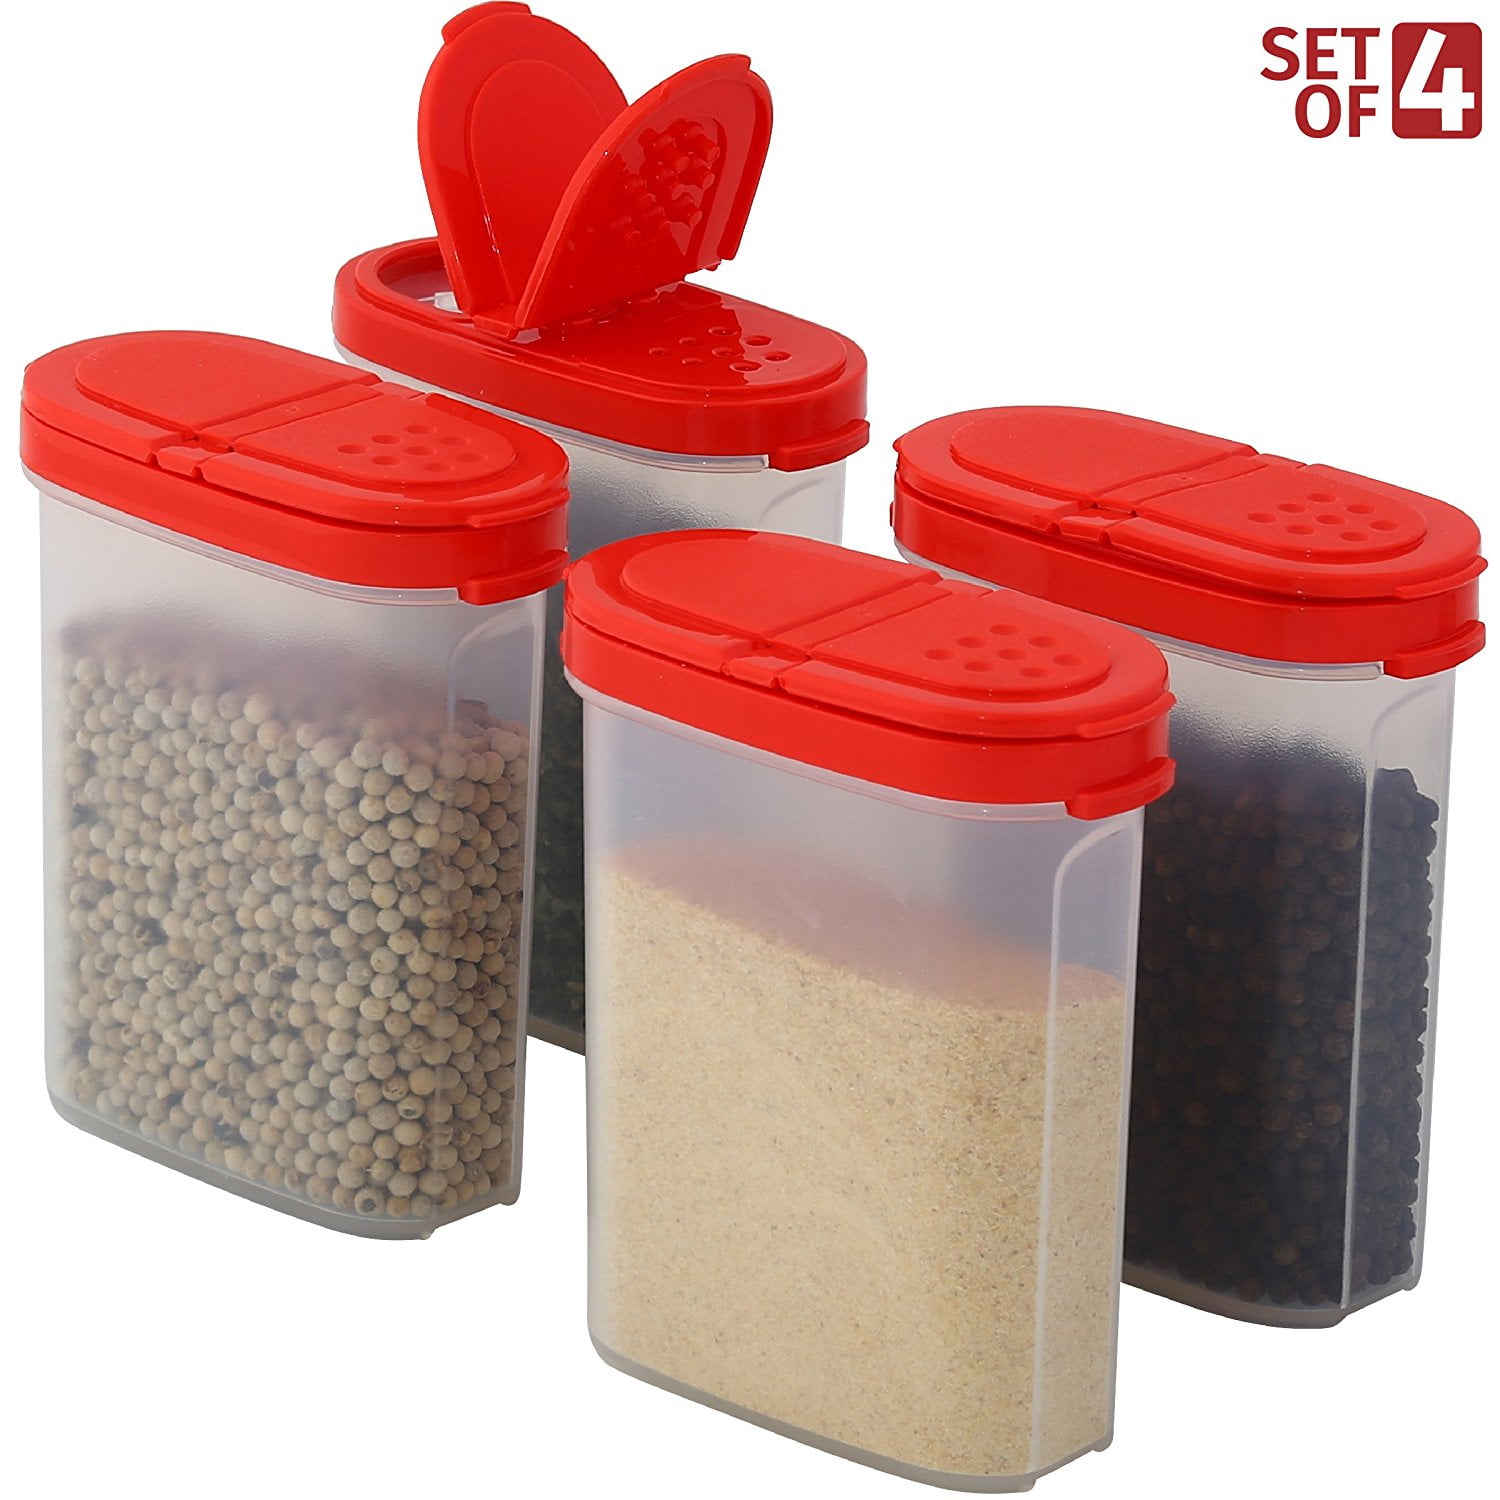 Clear Plastic Spice Jars w/ Easy Dispense Dual Sifter Caps - B1G1 Free